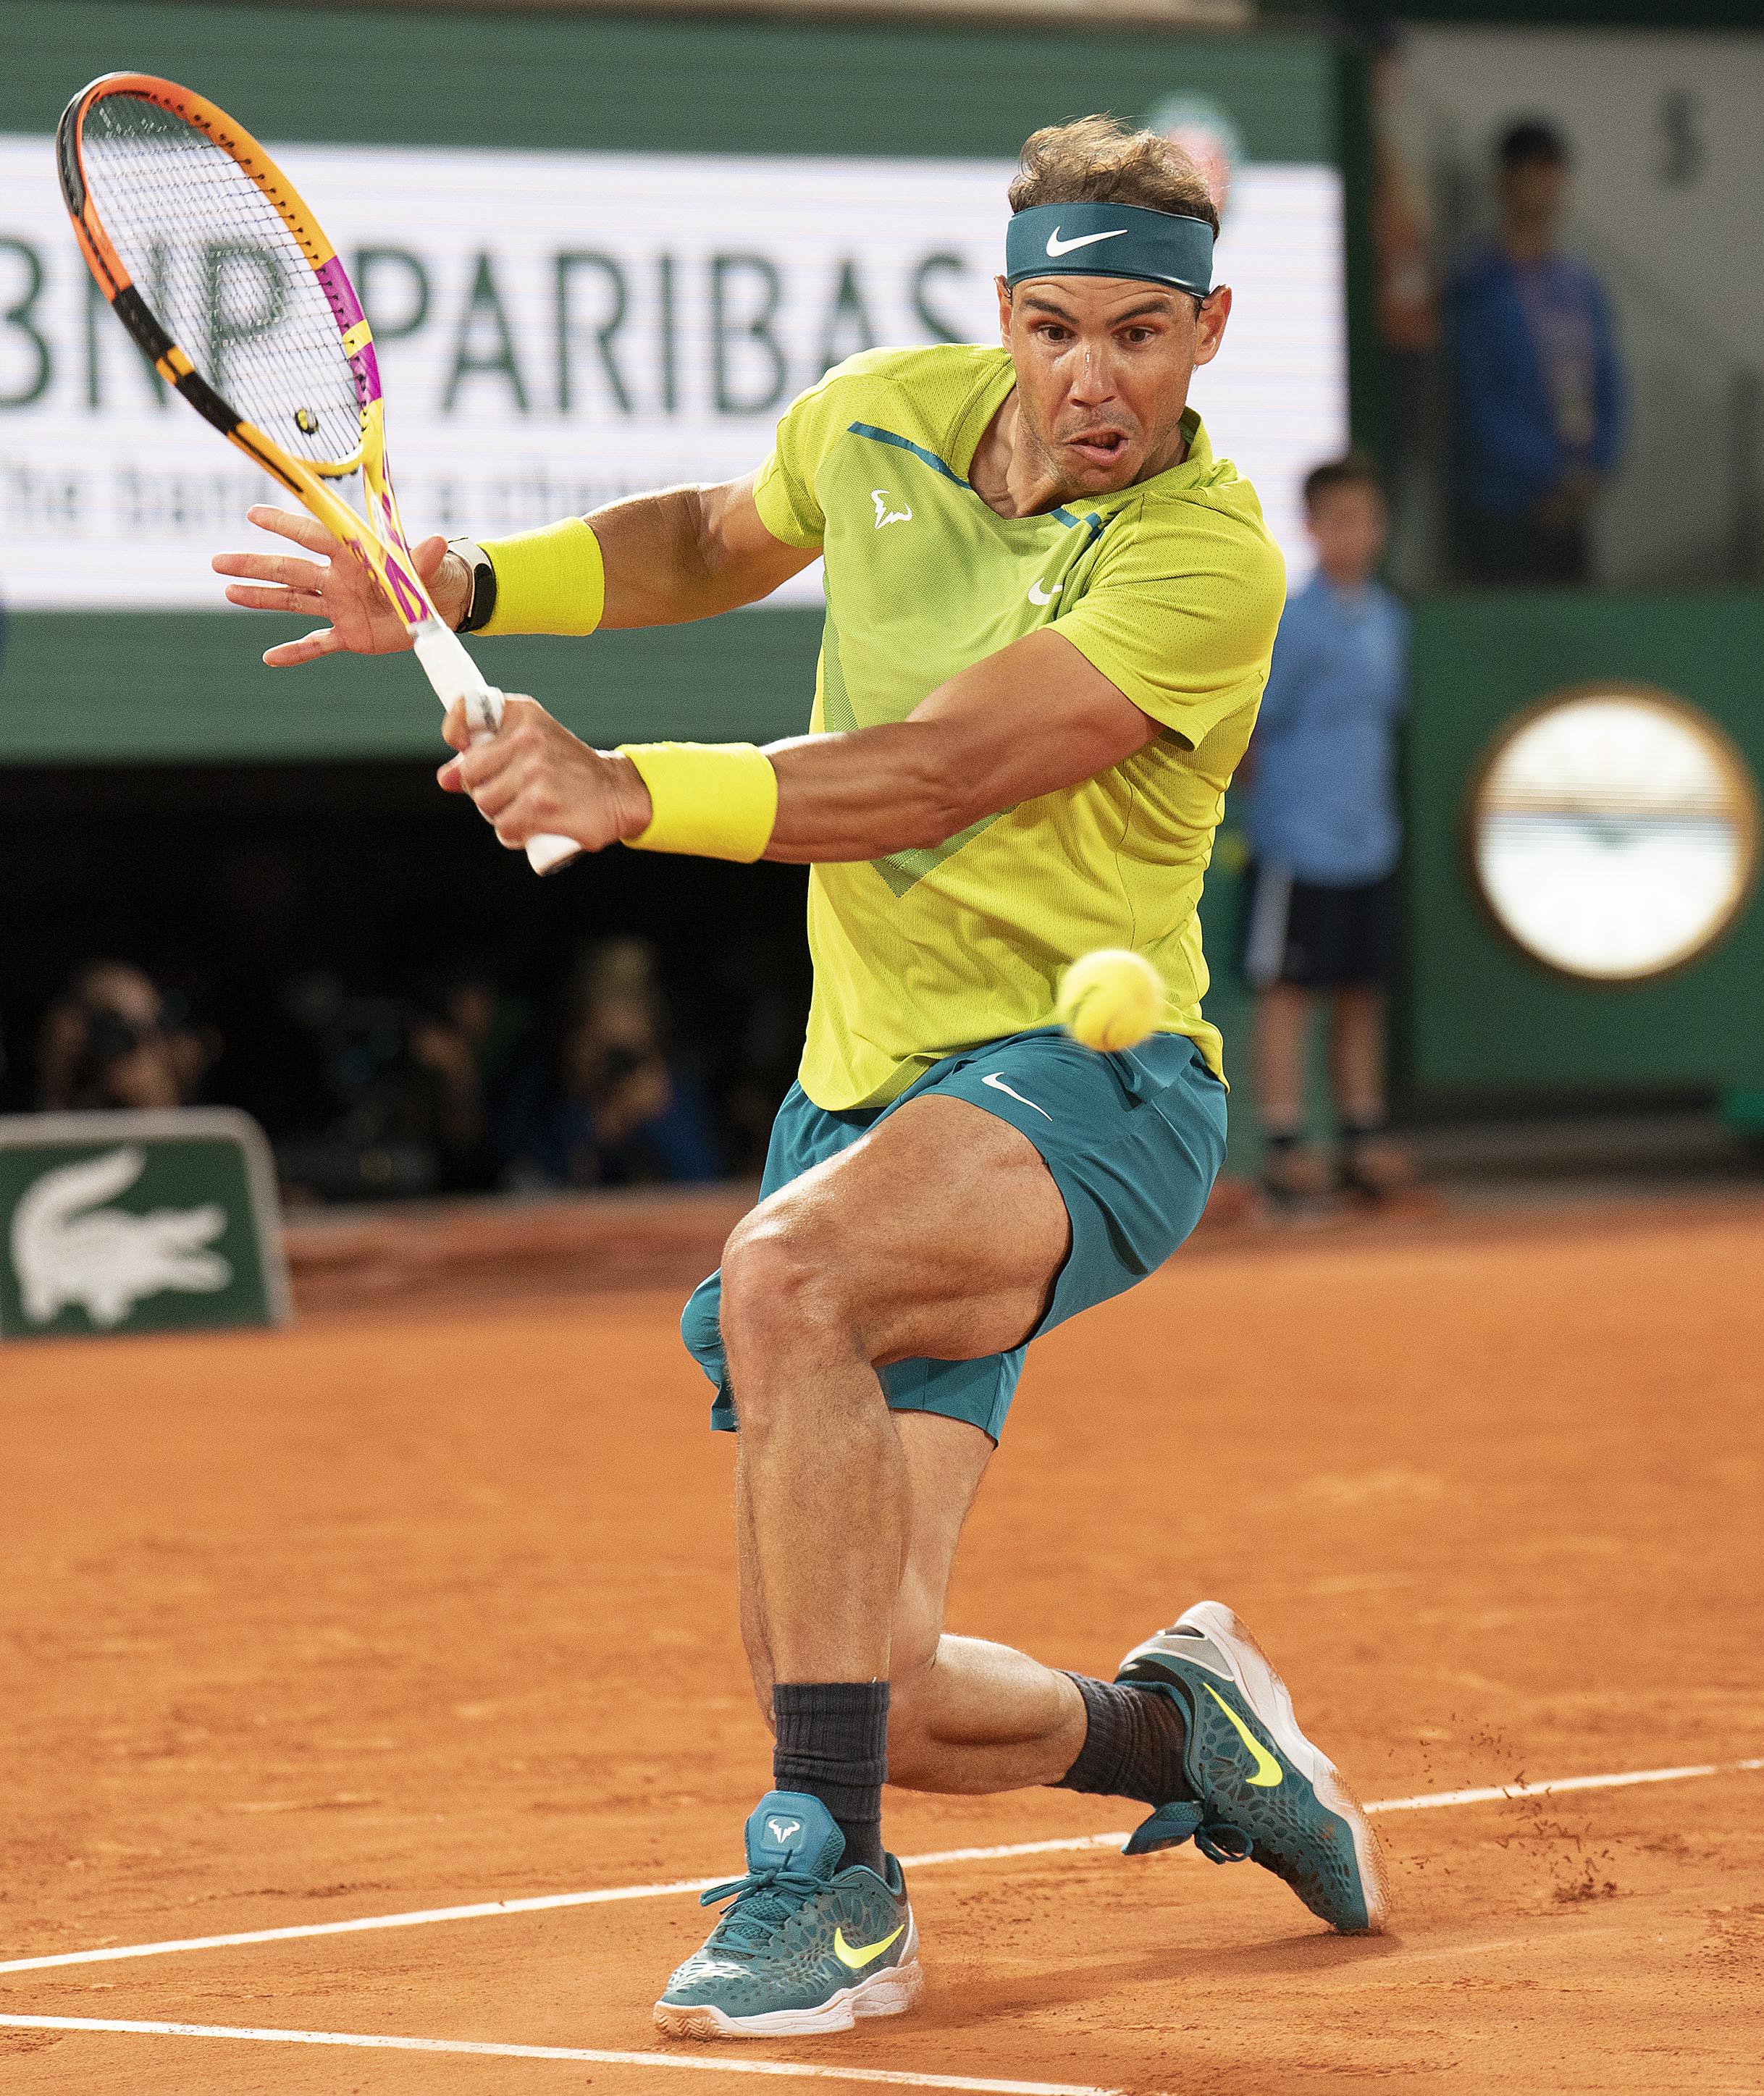 Rafael Nadal vs Casper Ruud Odds, Prediction and Betting Trends for 2022 French Open Men's Final